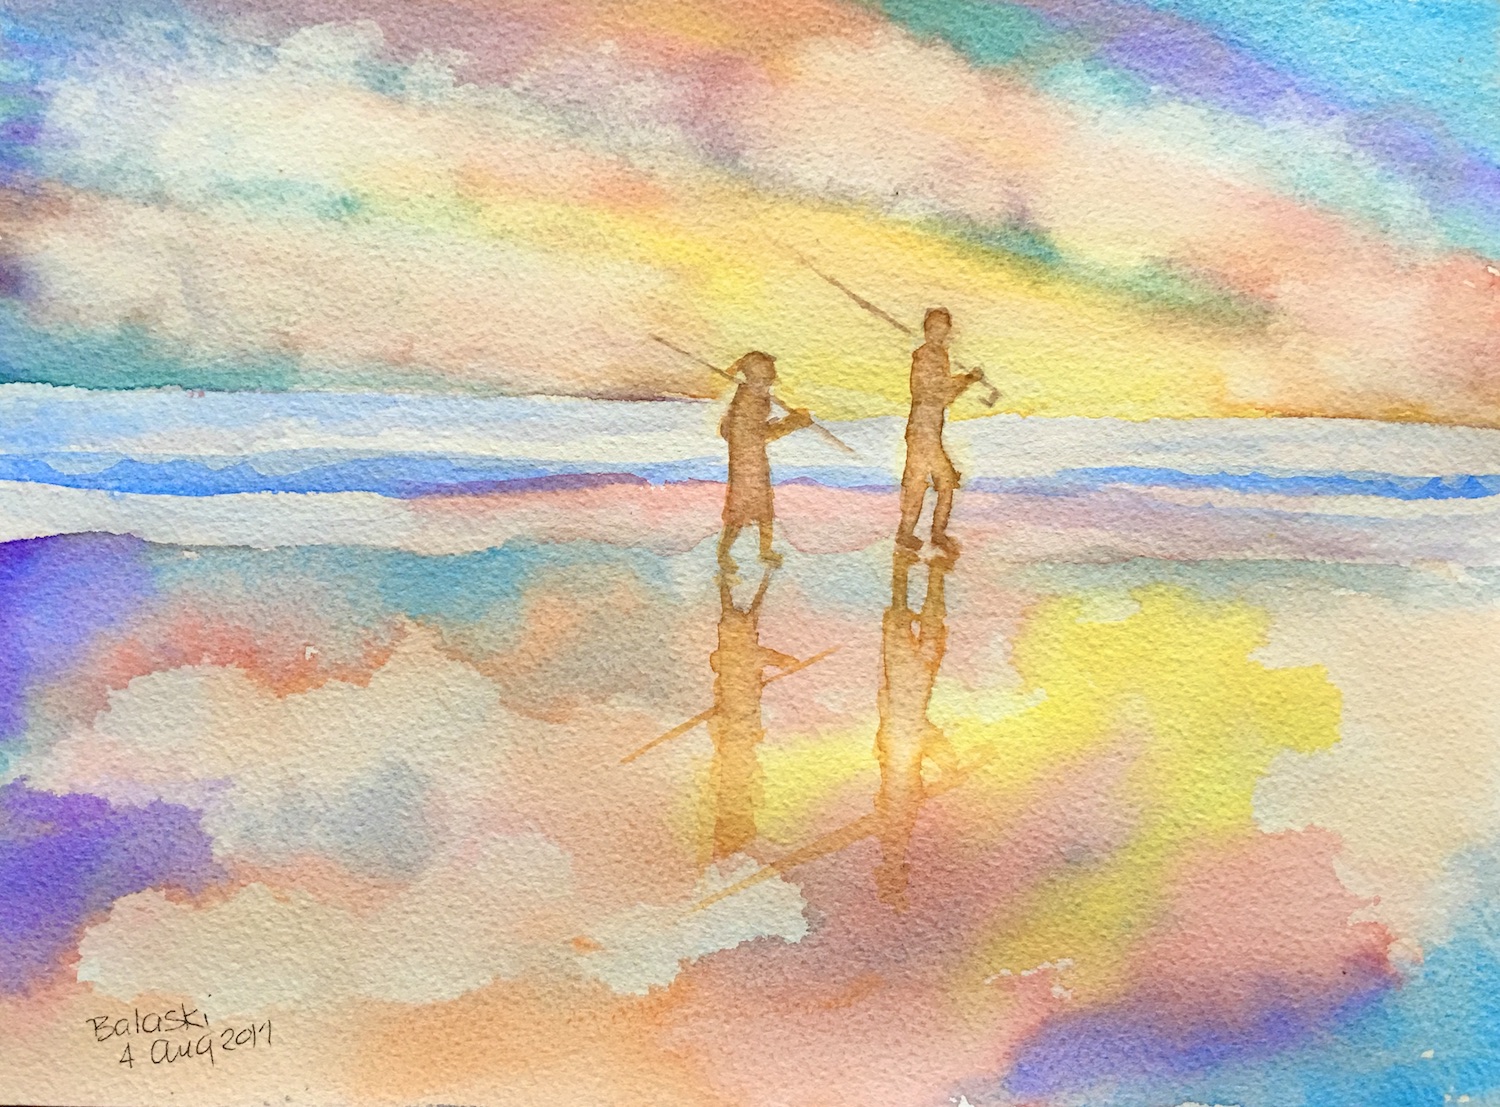 Watercolor painting of 2 figures with fishing poles with sunset behind them